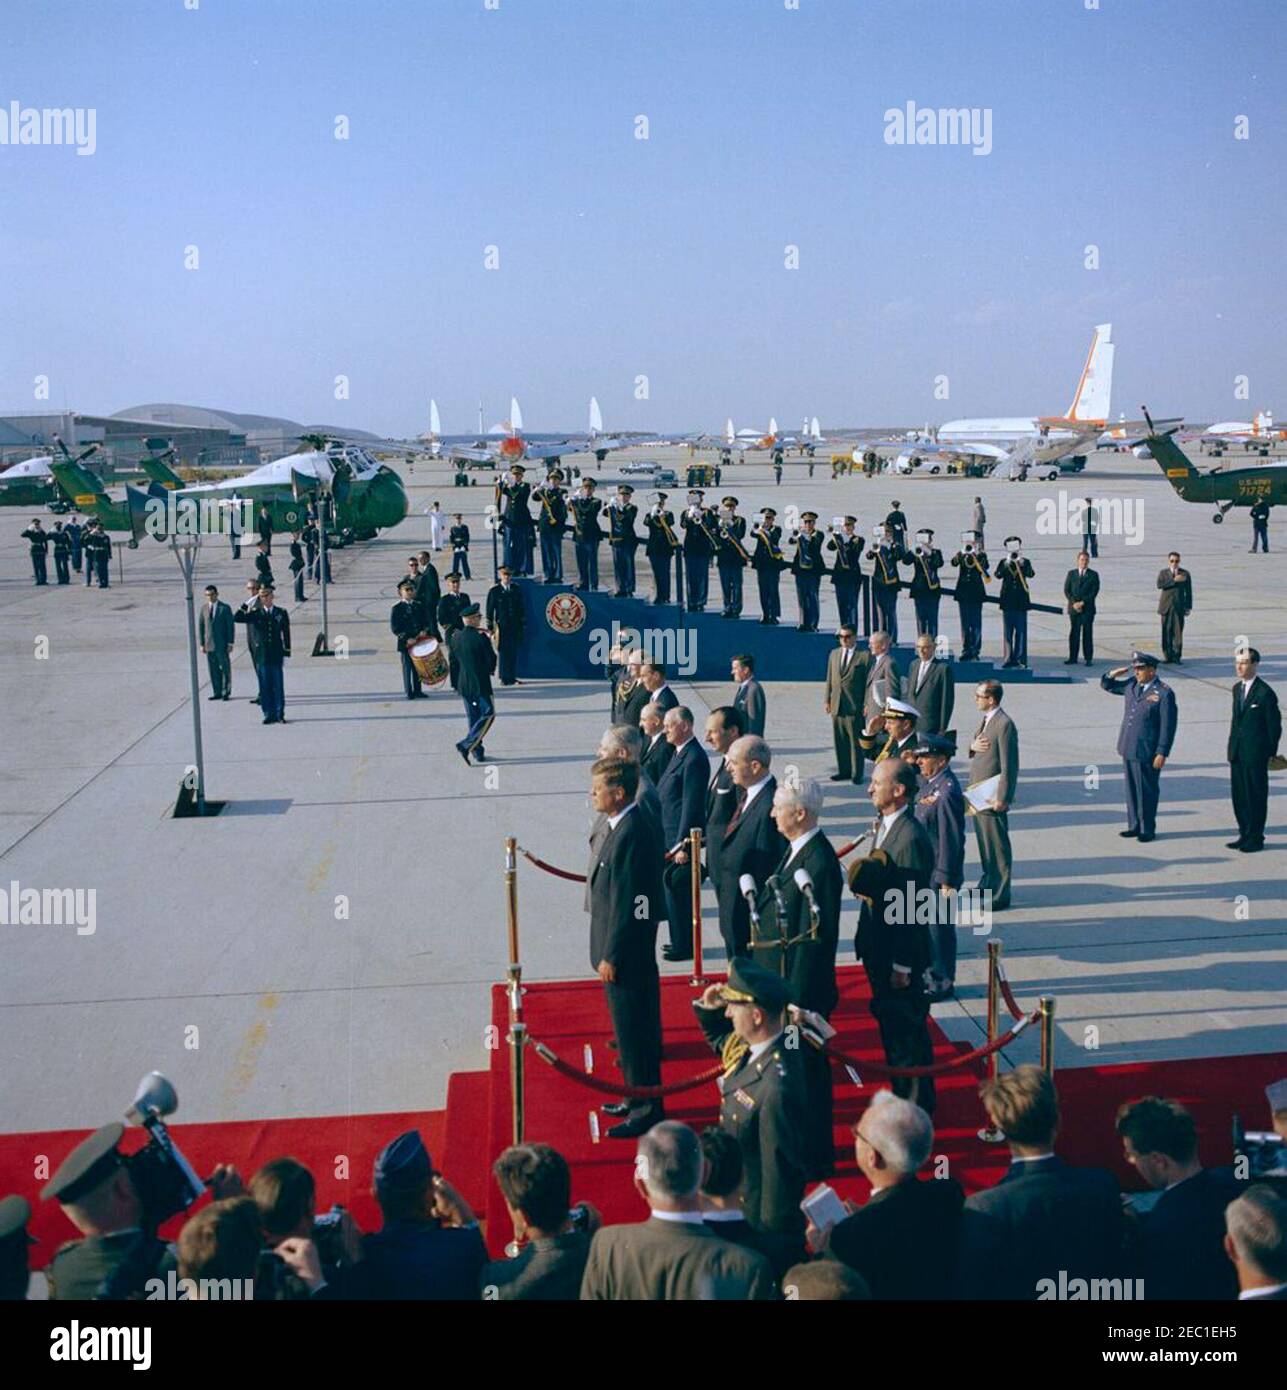 Arrival ceremonies for Harold Macmillan, Prime Minister of Great Britain, 4:50PM. Arrival ceremonies in honor of Prime Minister of Great Britain, Harold Macmillan. Standing on the reviewing platform (L-R): President John F. Kennedy; Prime Minister Macmillan; United States Ambassador to Great Britain, David K. E. Bruce; Secretary of State, Dean Rusk; Ambassador of Great Britain, Sir David Ormsby-Gore; and Chief of Protocol, Angier Biddle Duke. Also pictured: Secretary of the PMu2019s Cabinet, Sir Norman Brook; Deputy Assistant Secretary of State for European Affairs, William R. Tyler; Minister Stock Photo